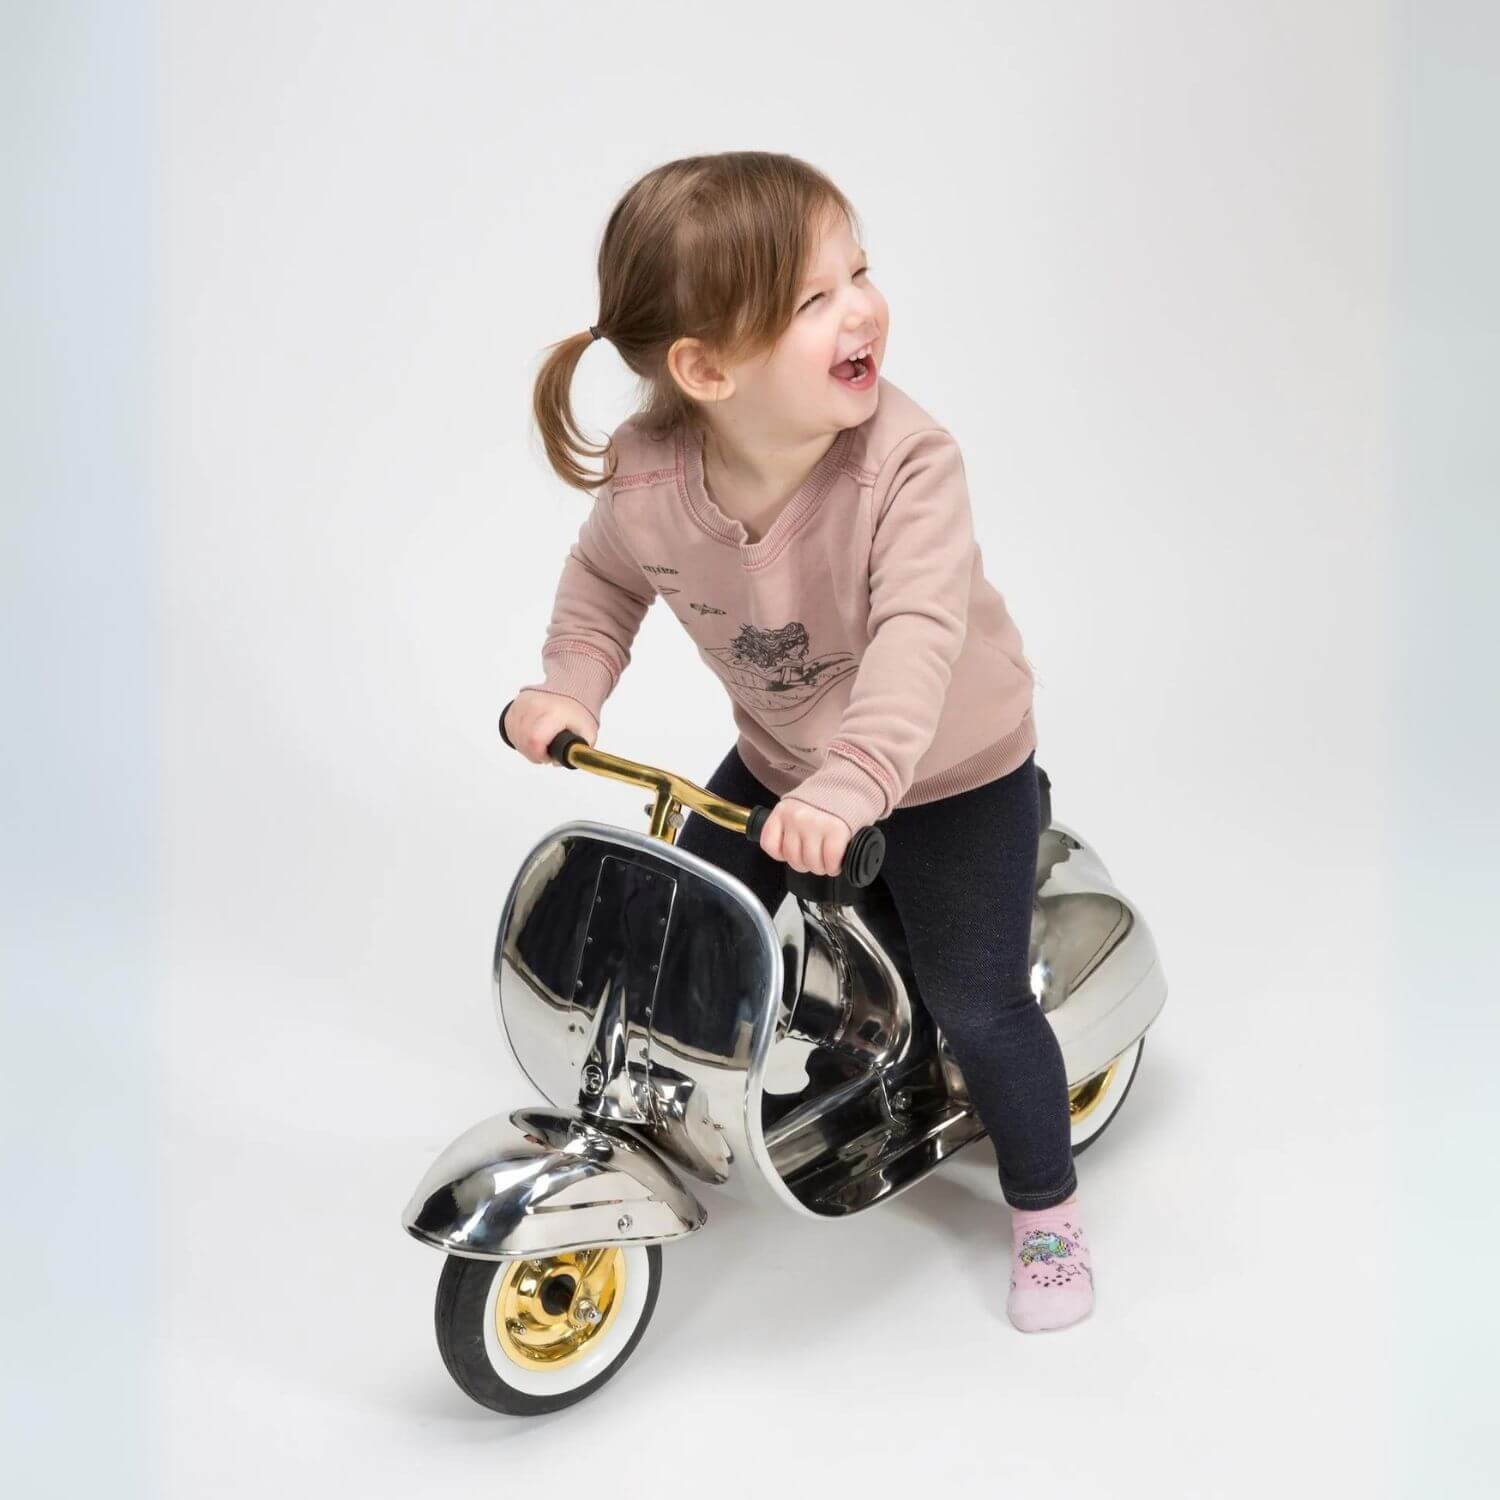 Primo Ride On Kids Toy DELUXE Stainless Steel (Limited Edition) - Lifestyle